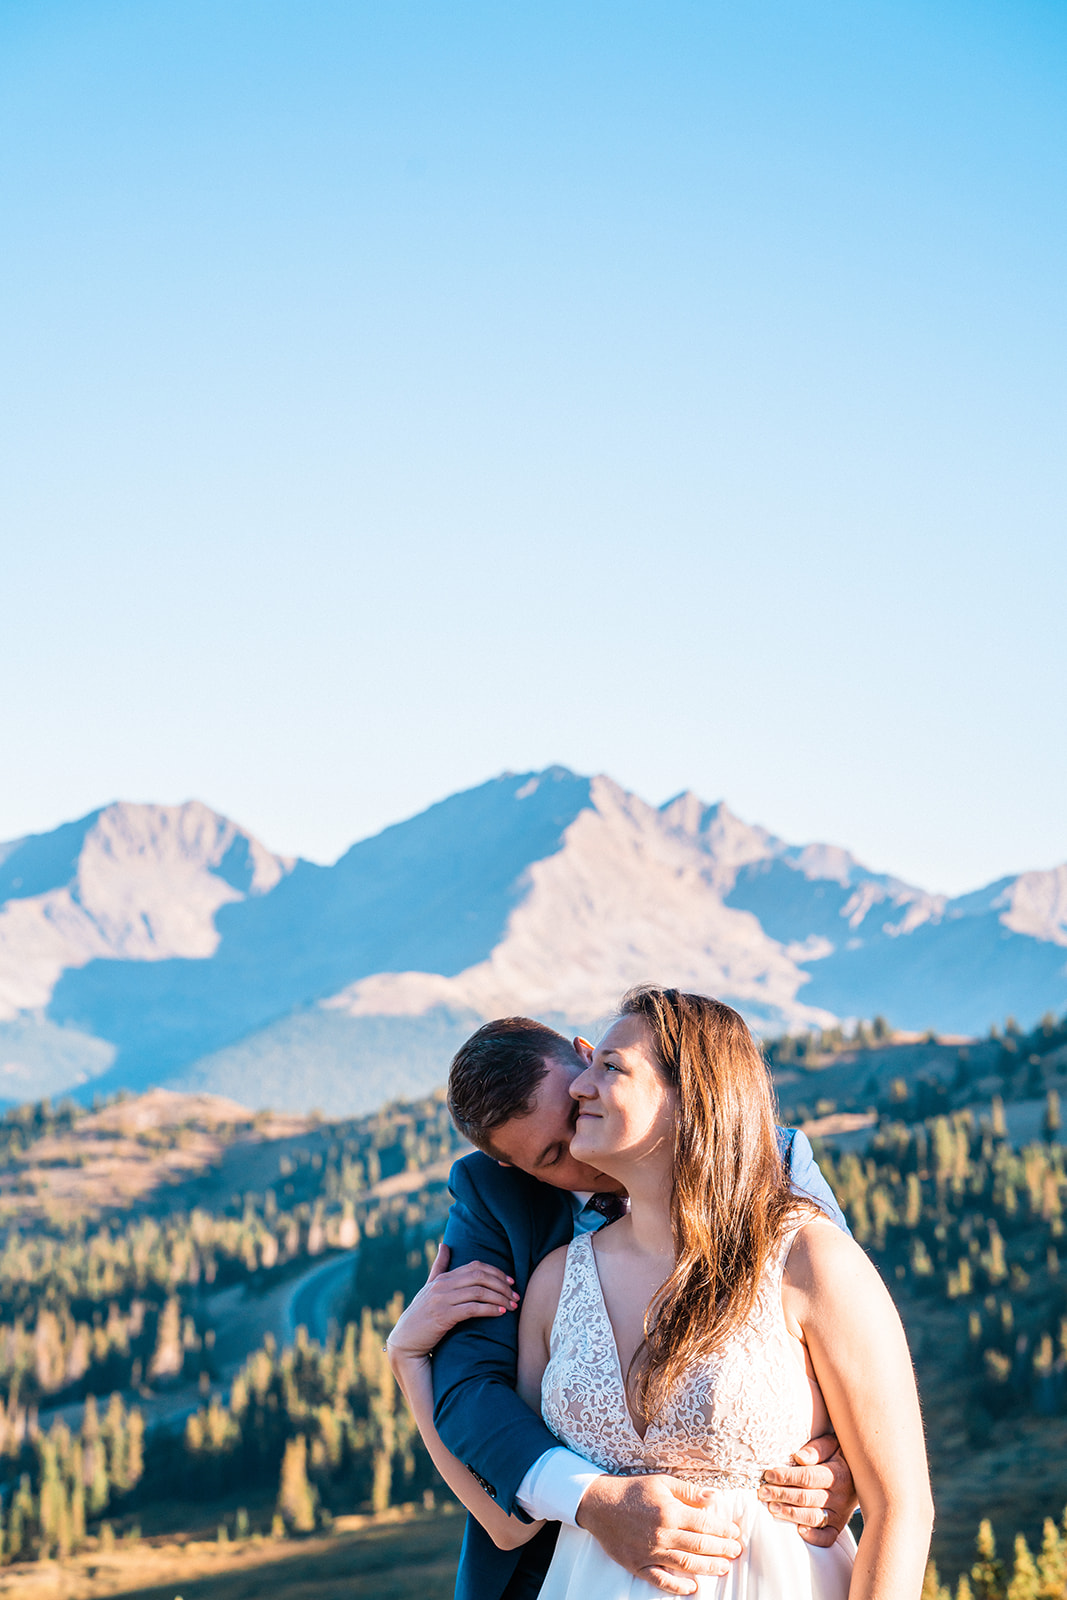 Groom kissing brides cheek with the Colorado mountains in the background